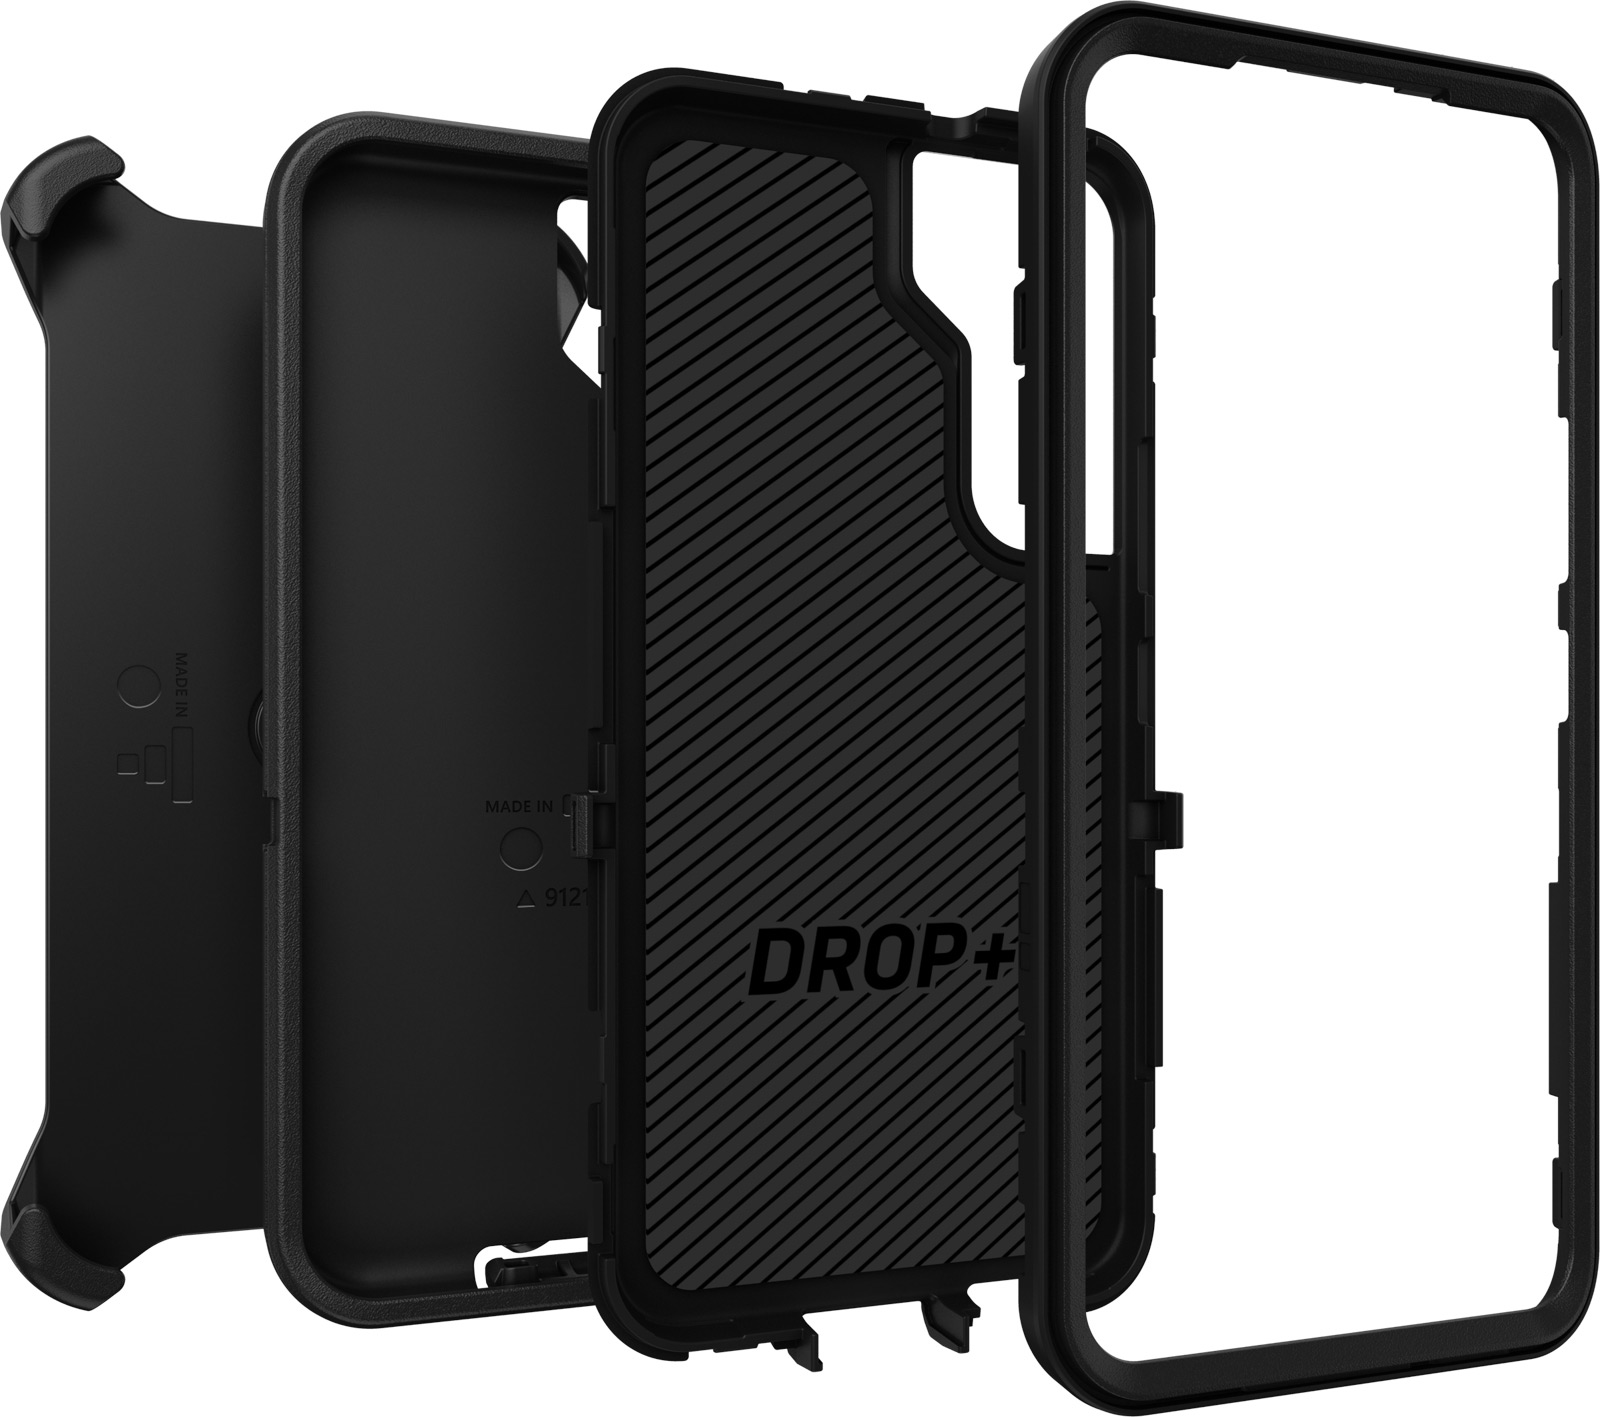 Angled Black OtterBox Galaxy S22 Defender Case in separate layers